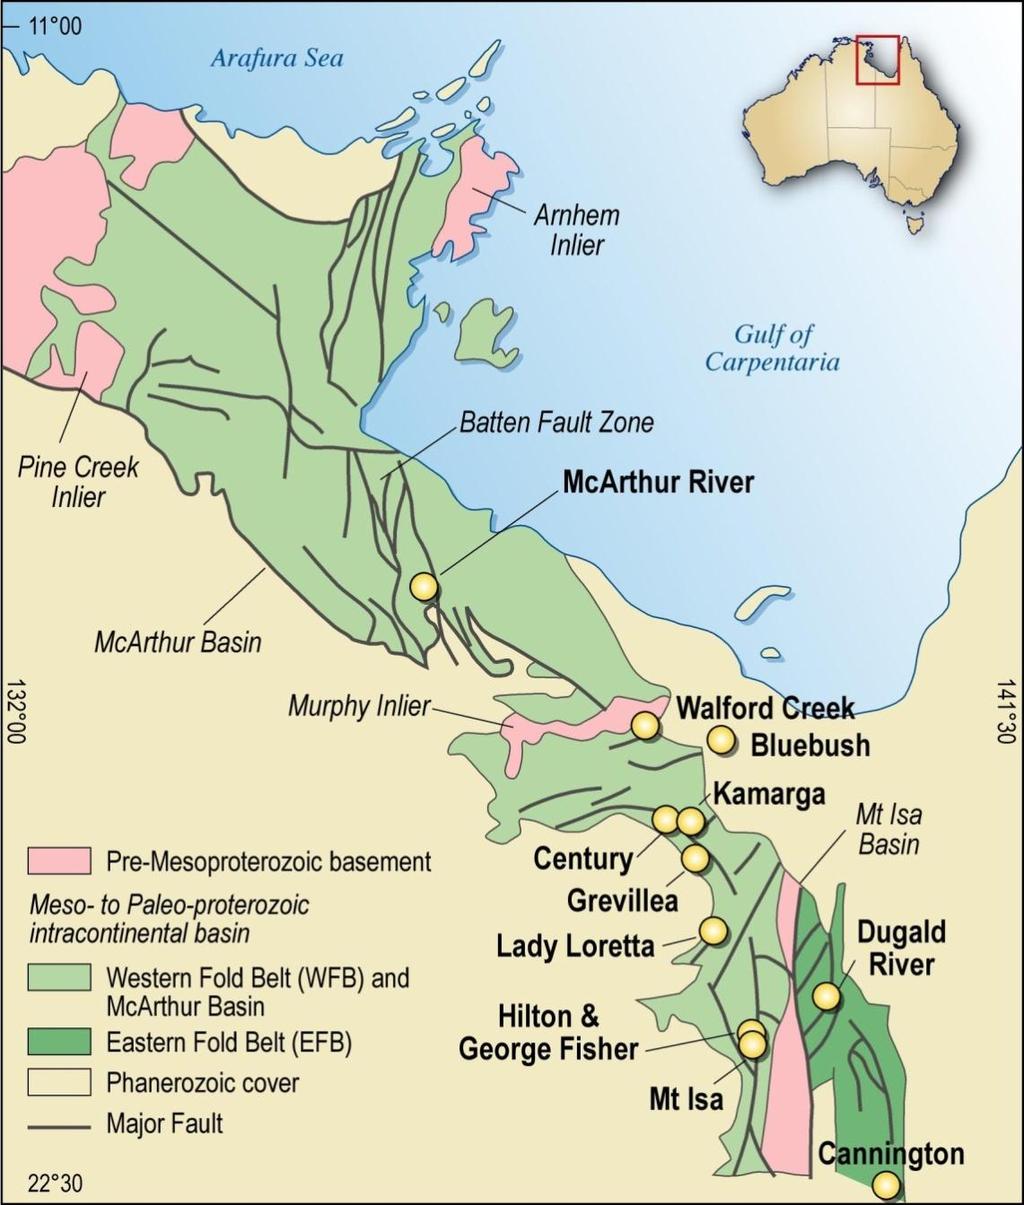 Myrtle/Reward Zinc Project Adjacent to McArthur River Mine Extensive infrastructure in place Teck $15M Earn-in (to 70%) Myrtle Resource 43.6 Mt @ 4.05% Zn, 0.95% Pb, 5.04% Zn+Pb, 2.